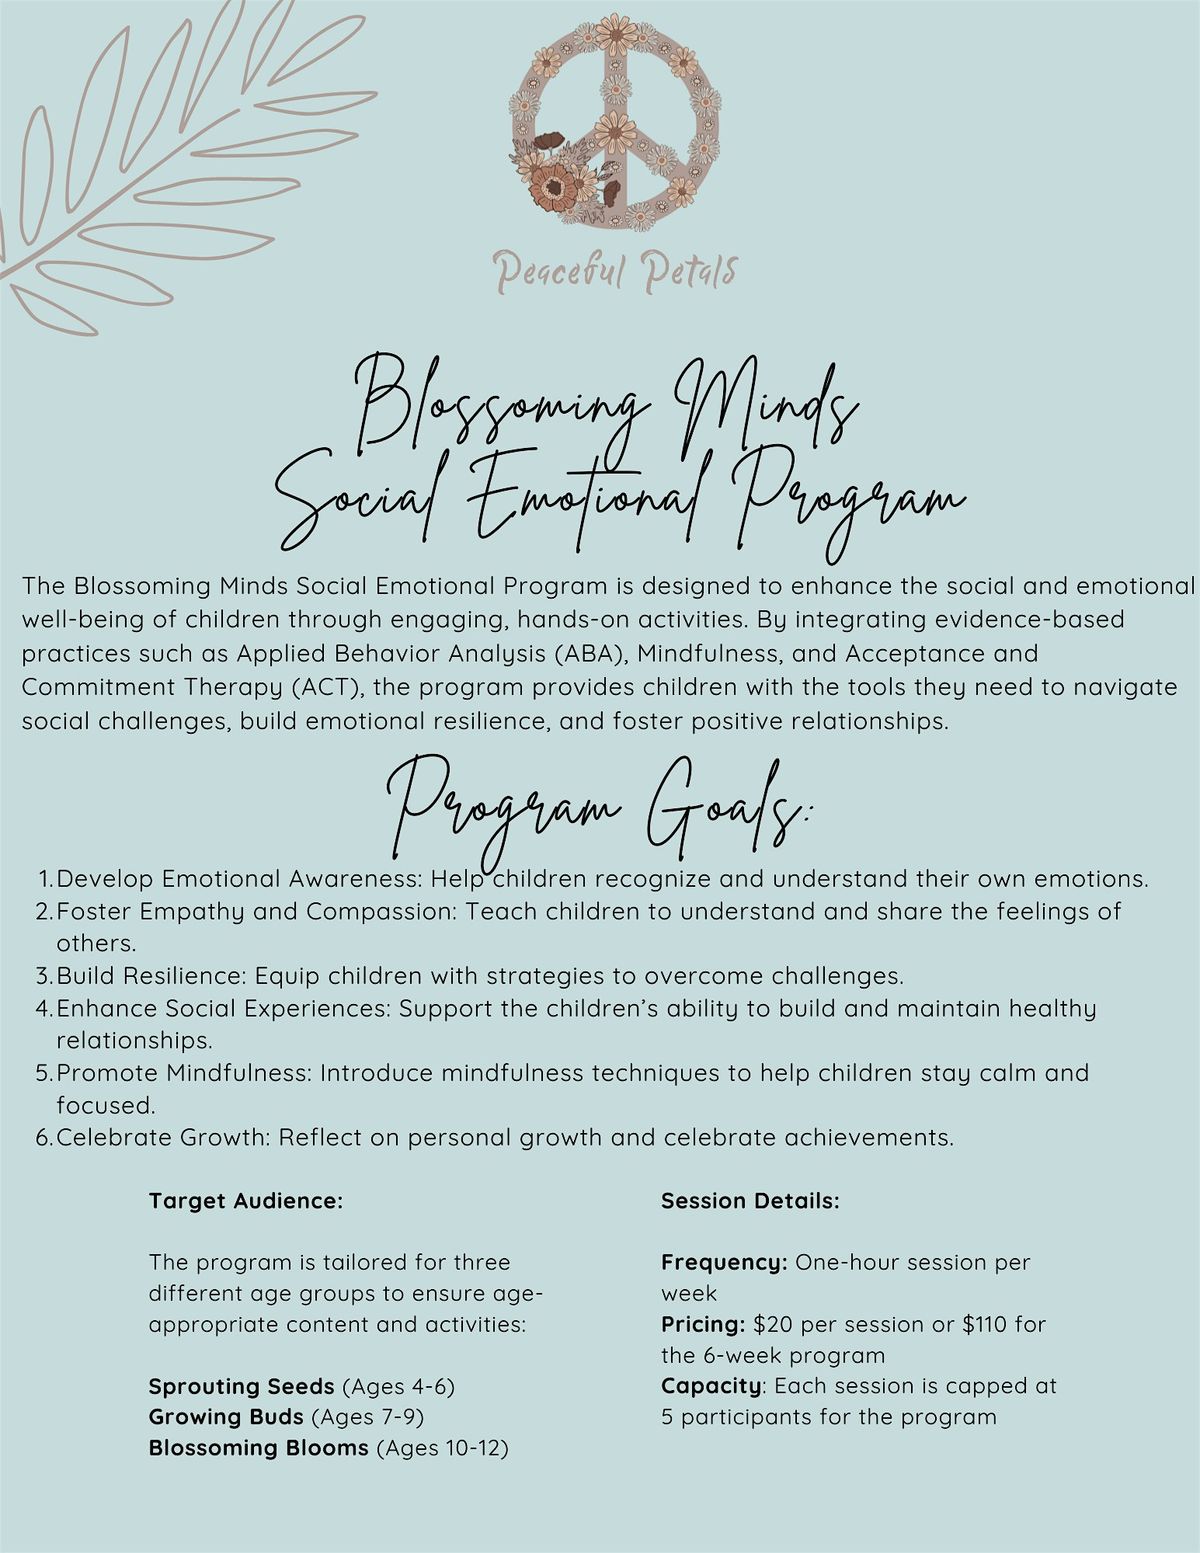 Blossoming Minds  Social Emotional Program (Blossoming Blooms Ages 9-11)